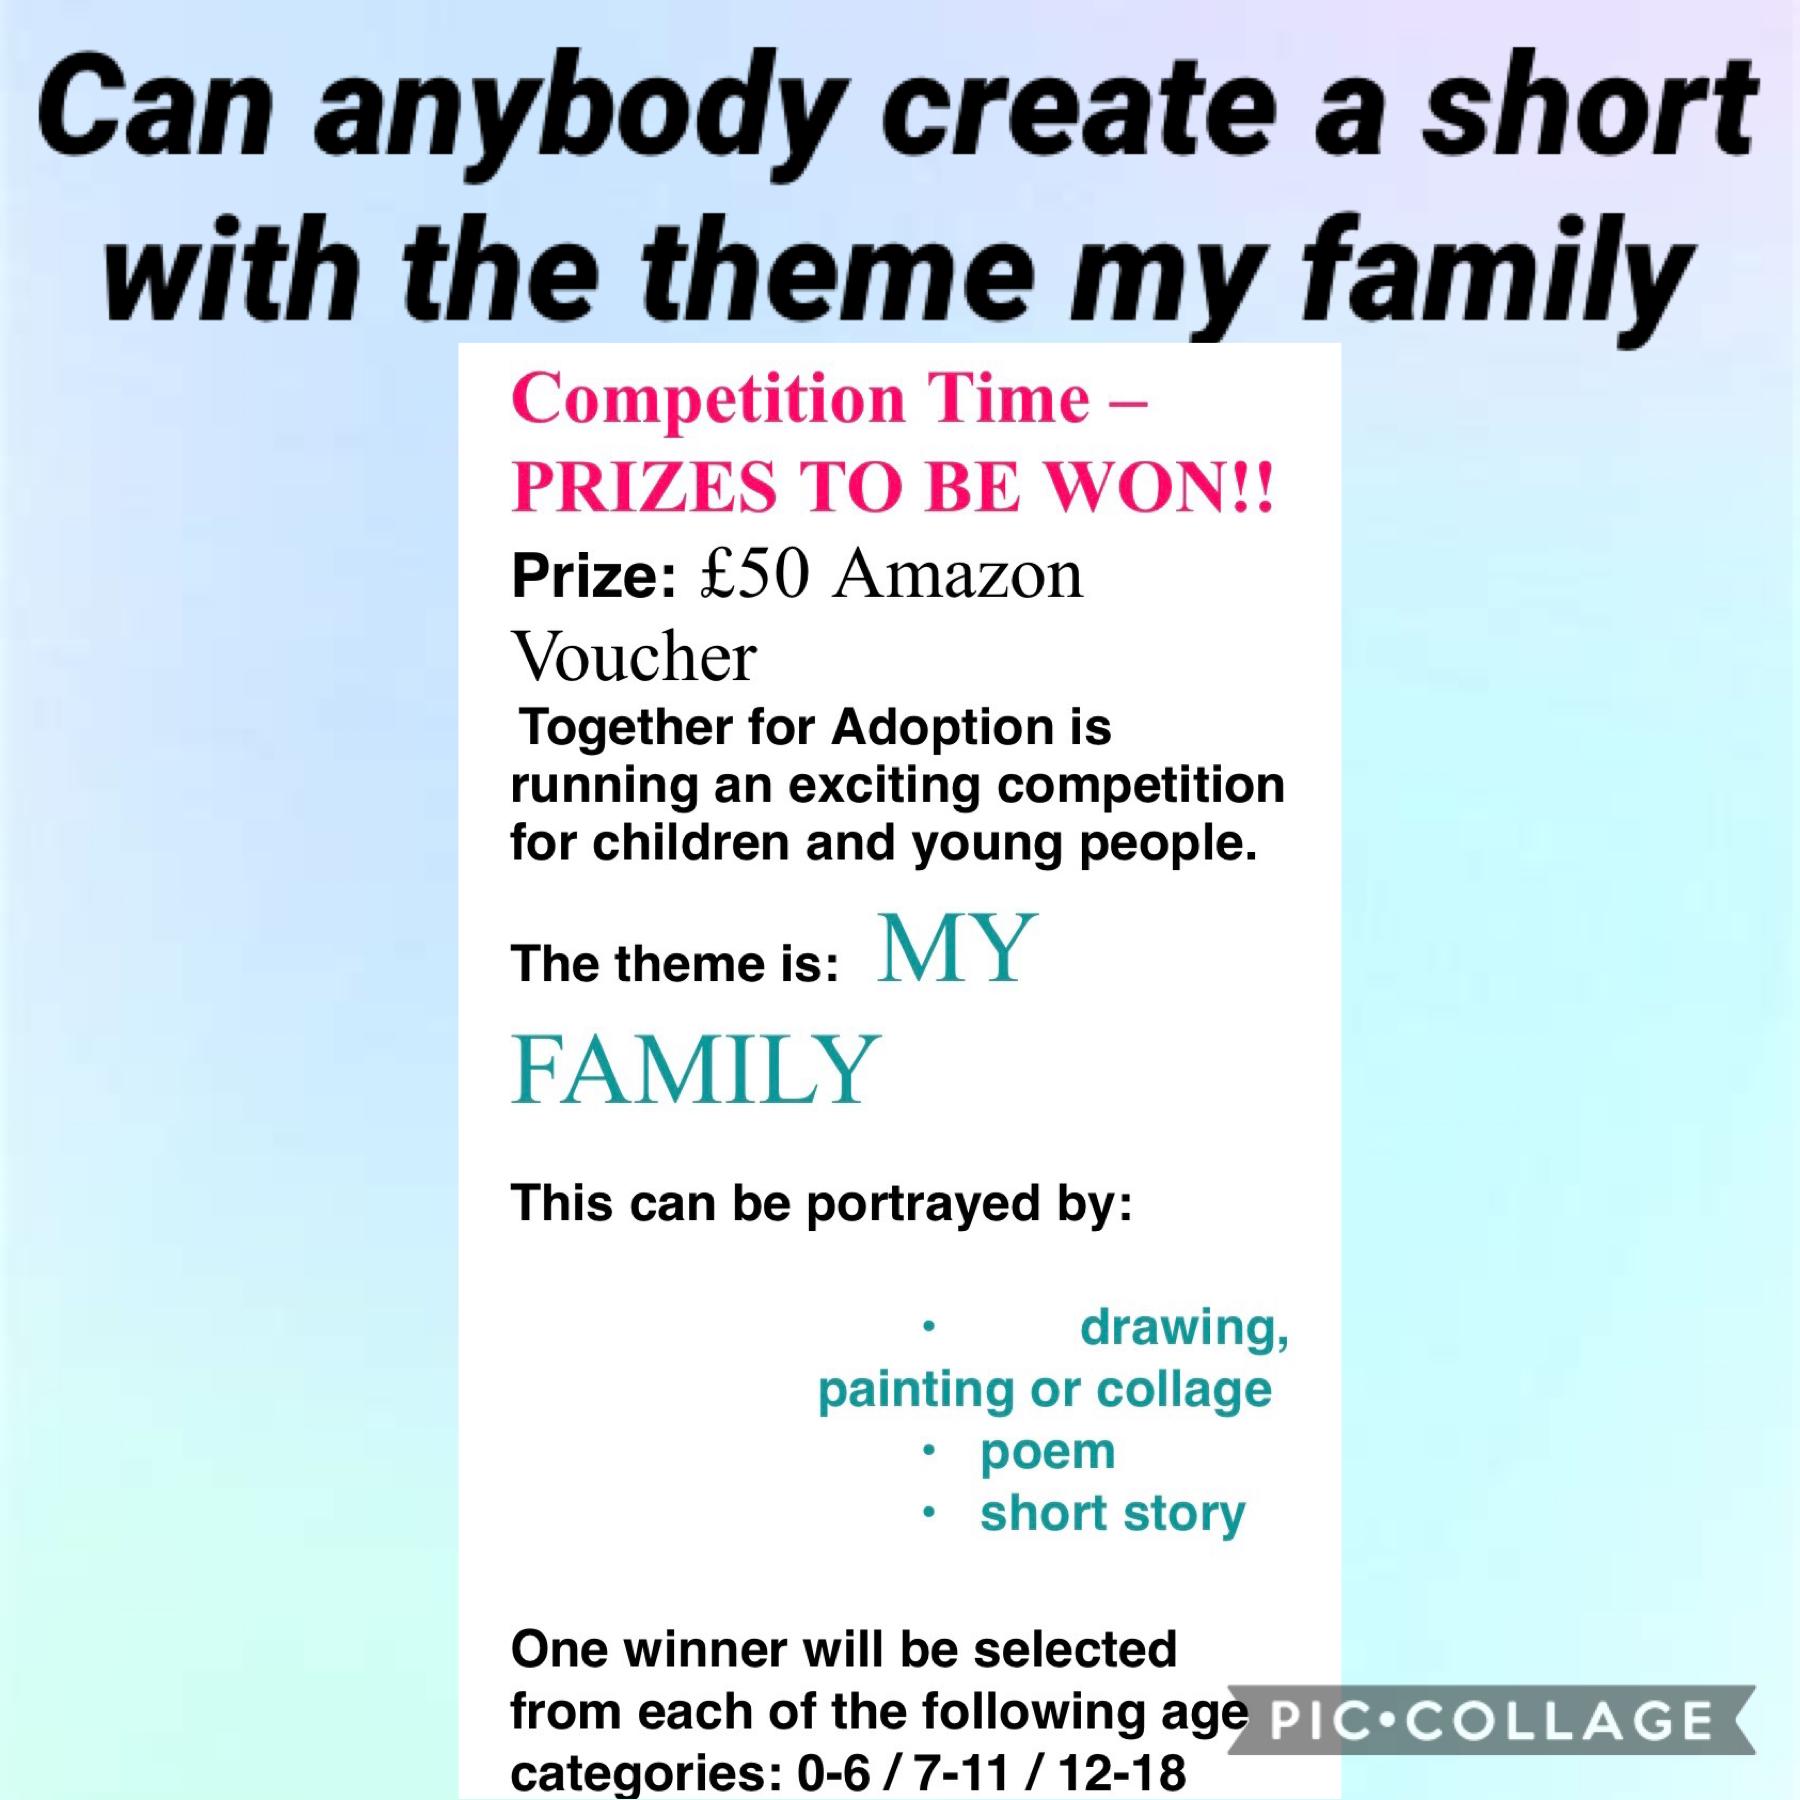 Please comment,like and remix I would love to give the prize to my mum.